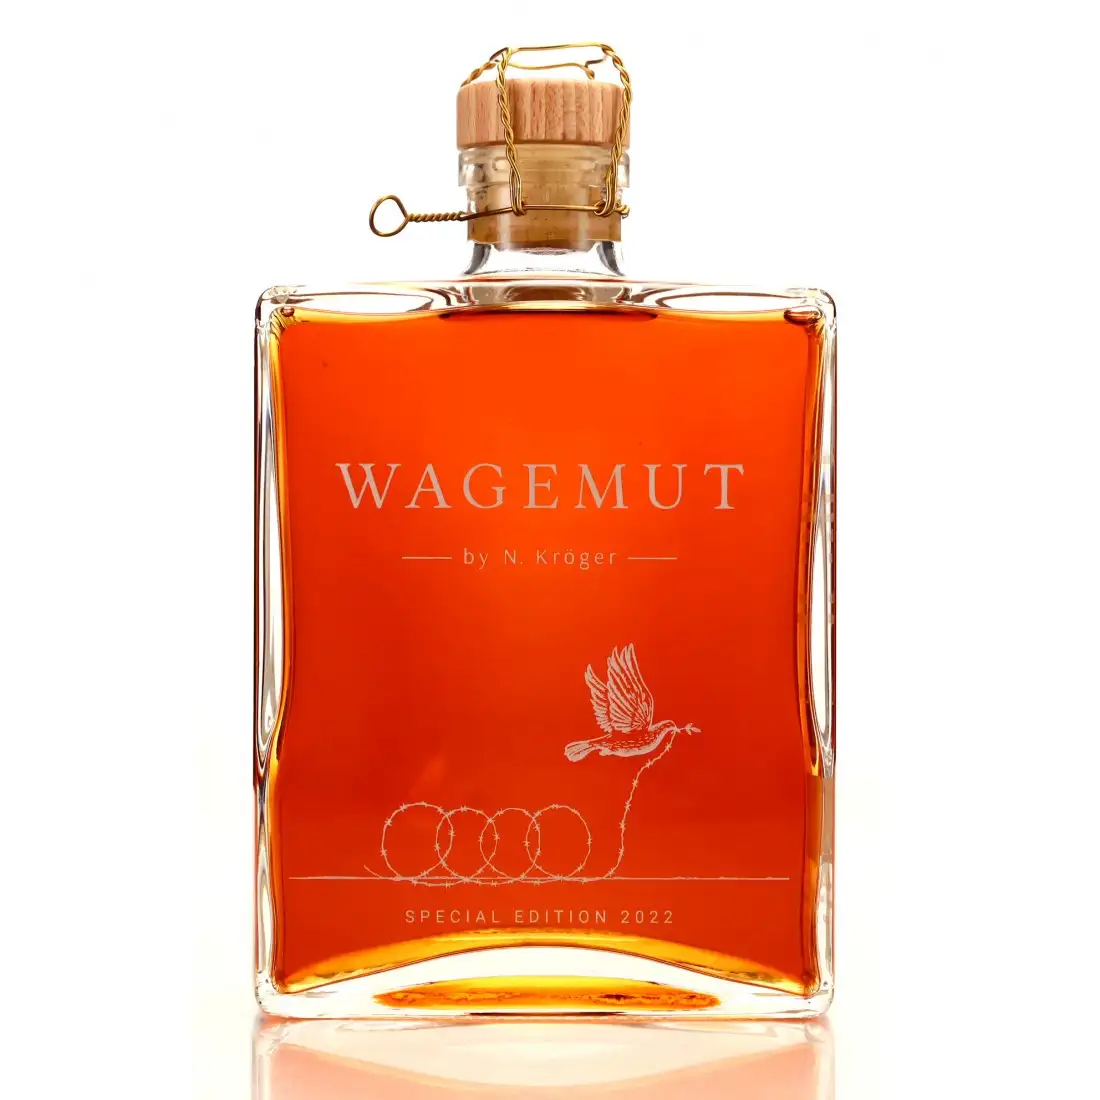 Image of the front of the bottle of the rum Wagemut Special Edition 2022